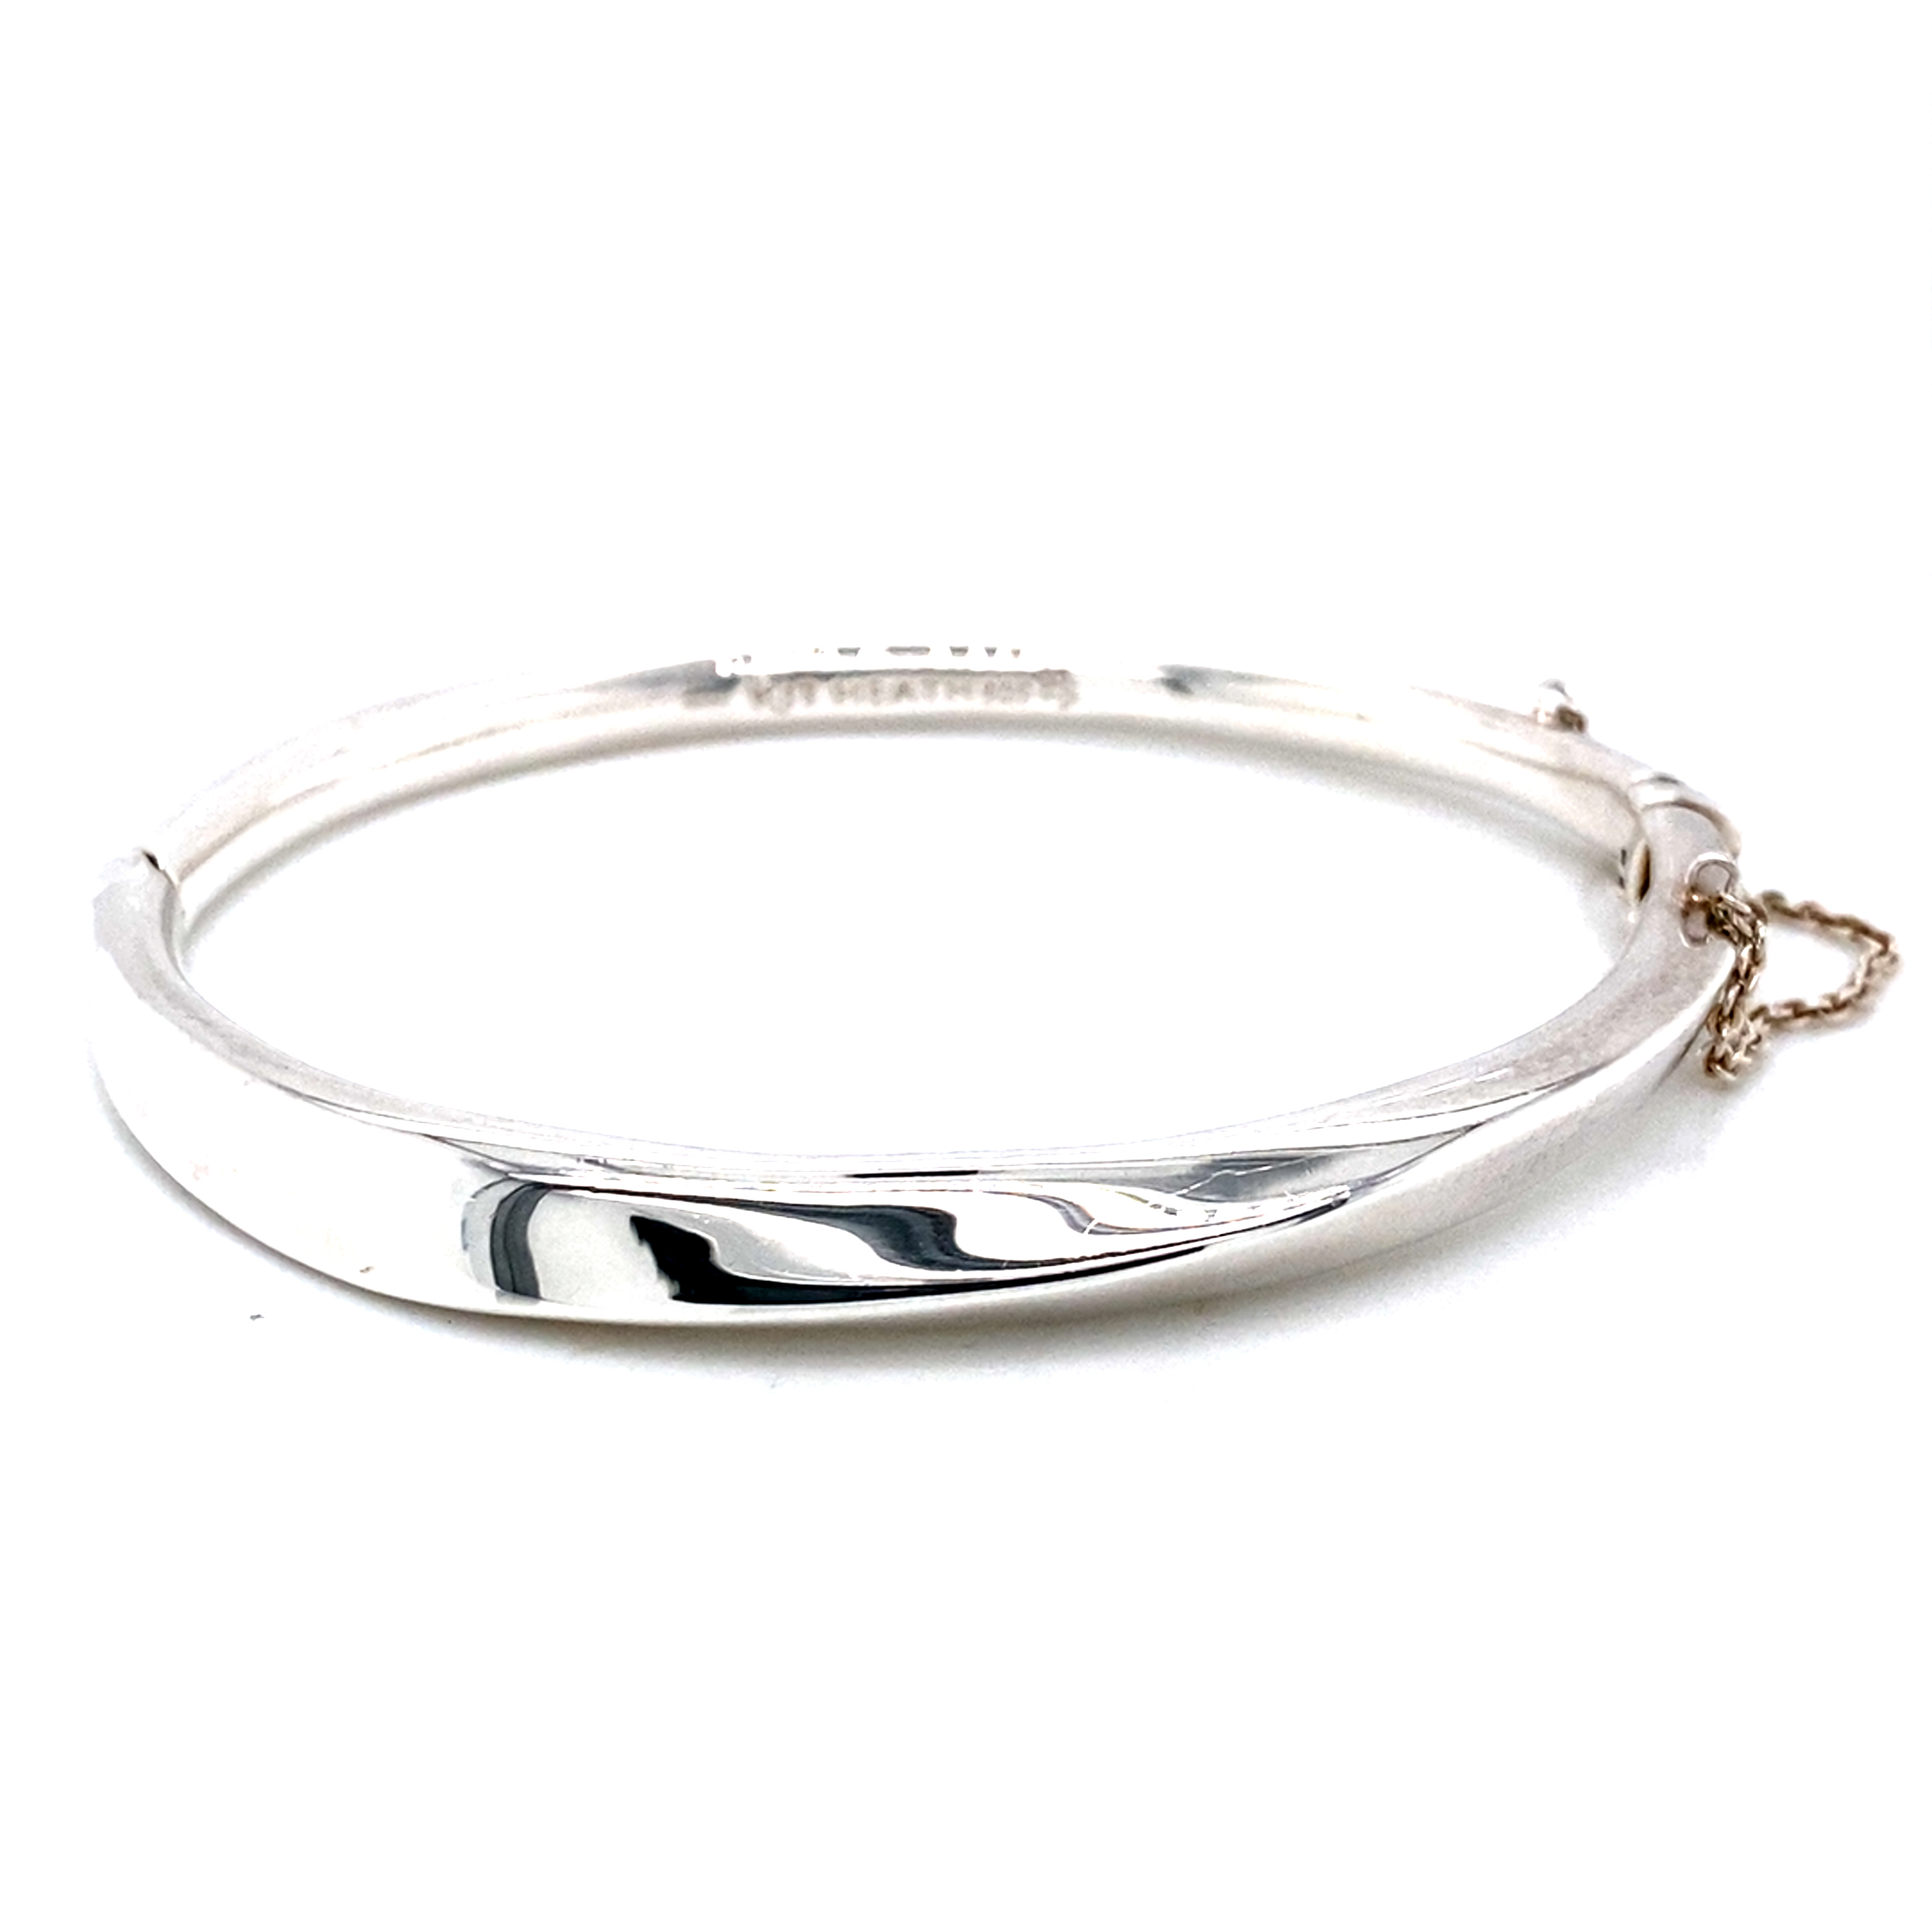 Heavy Weight Silver Hinge Bangle with Bevelled Edge.